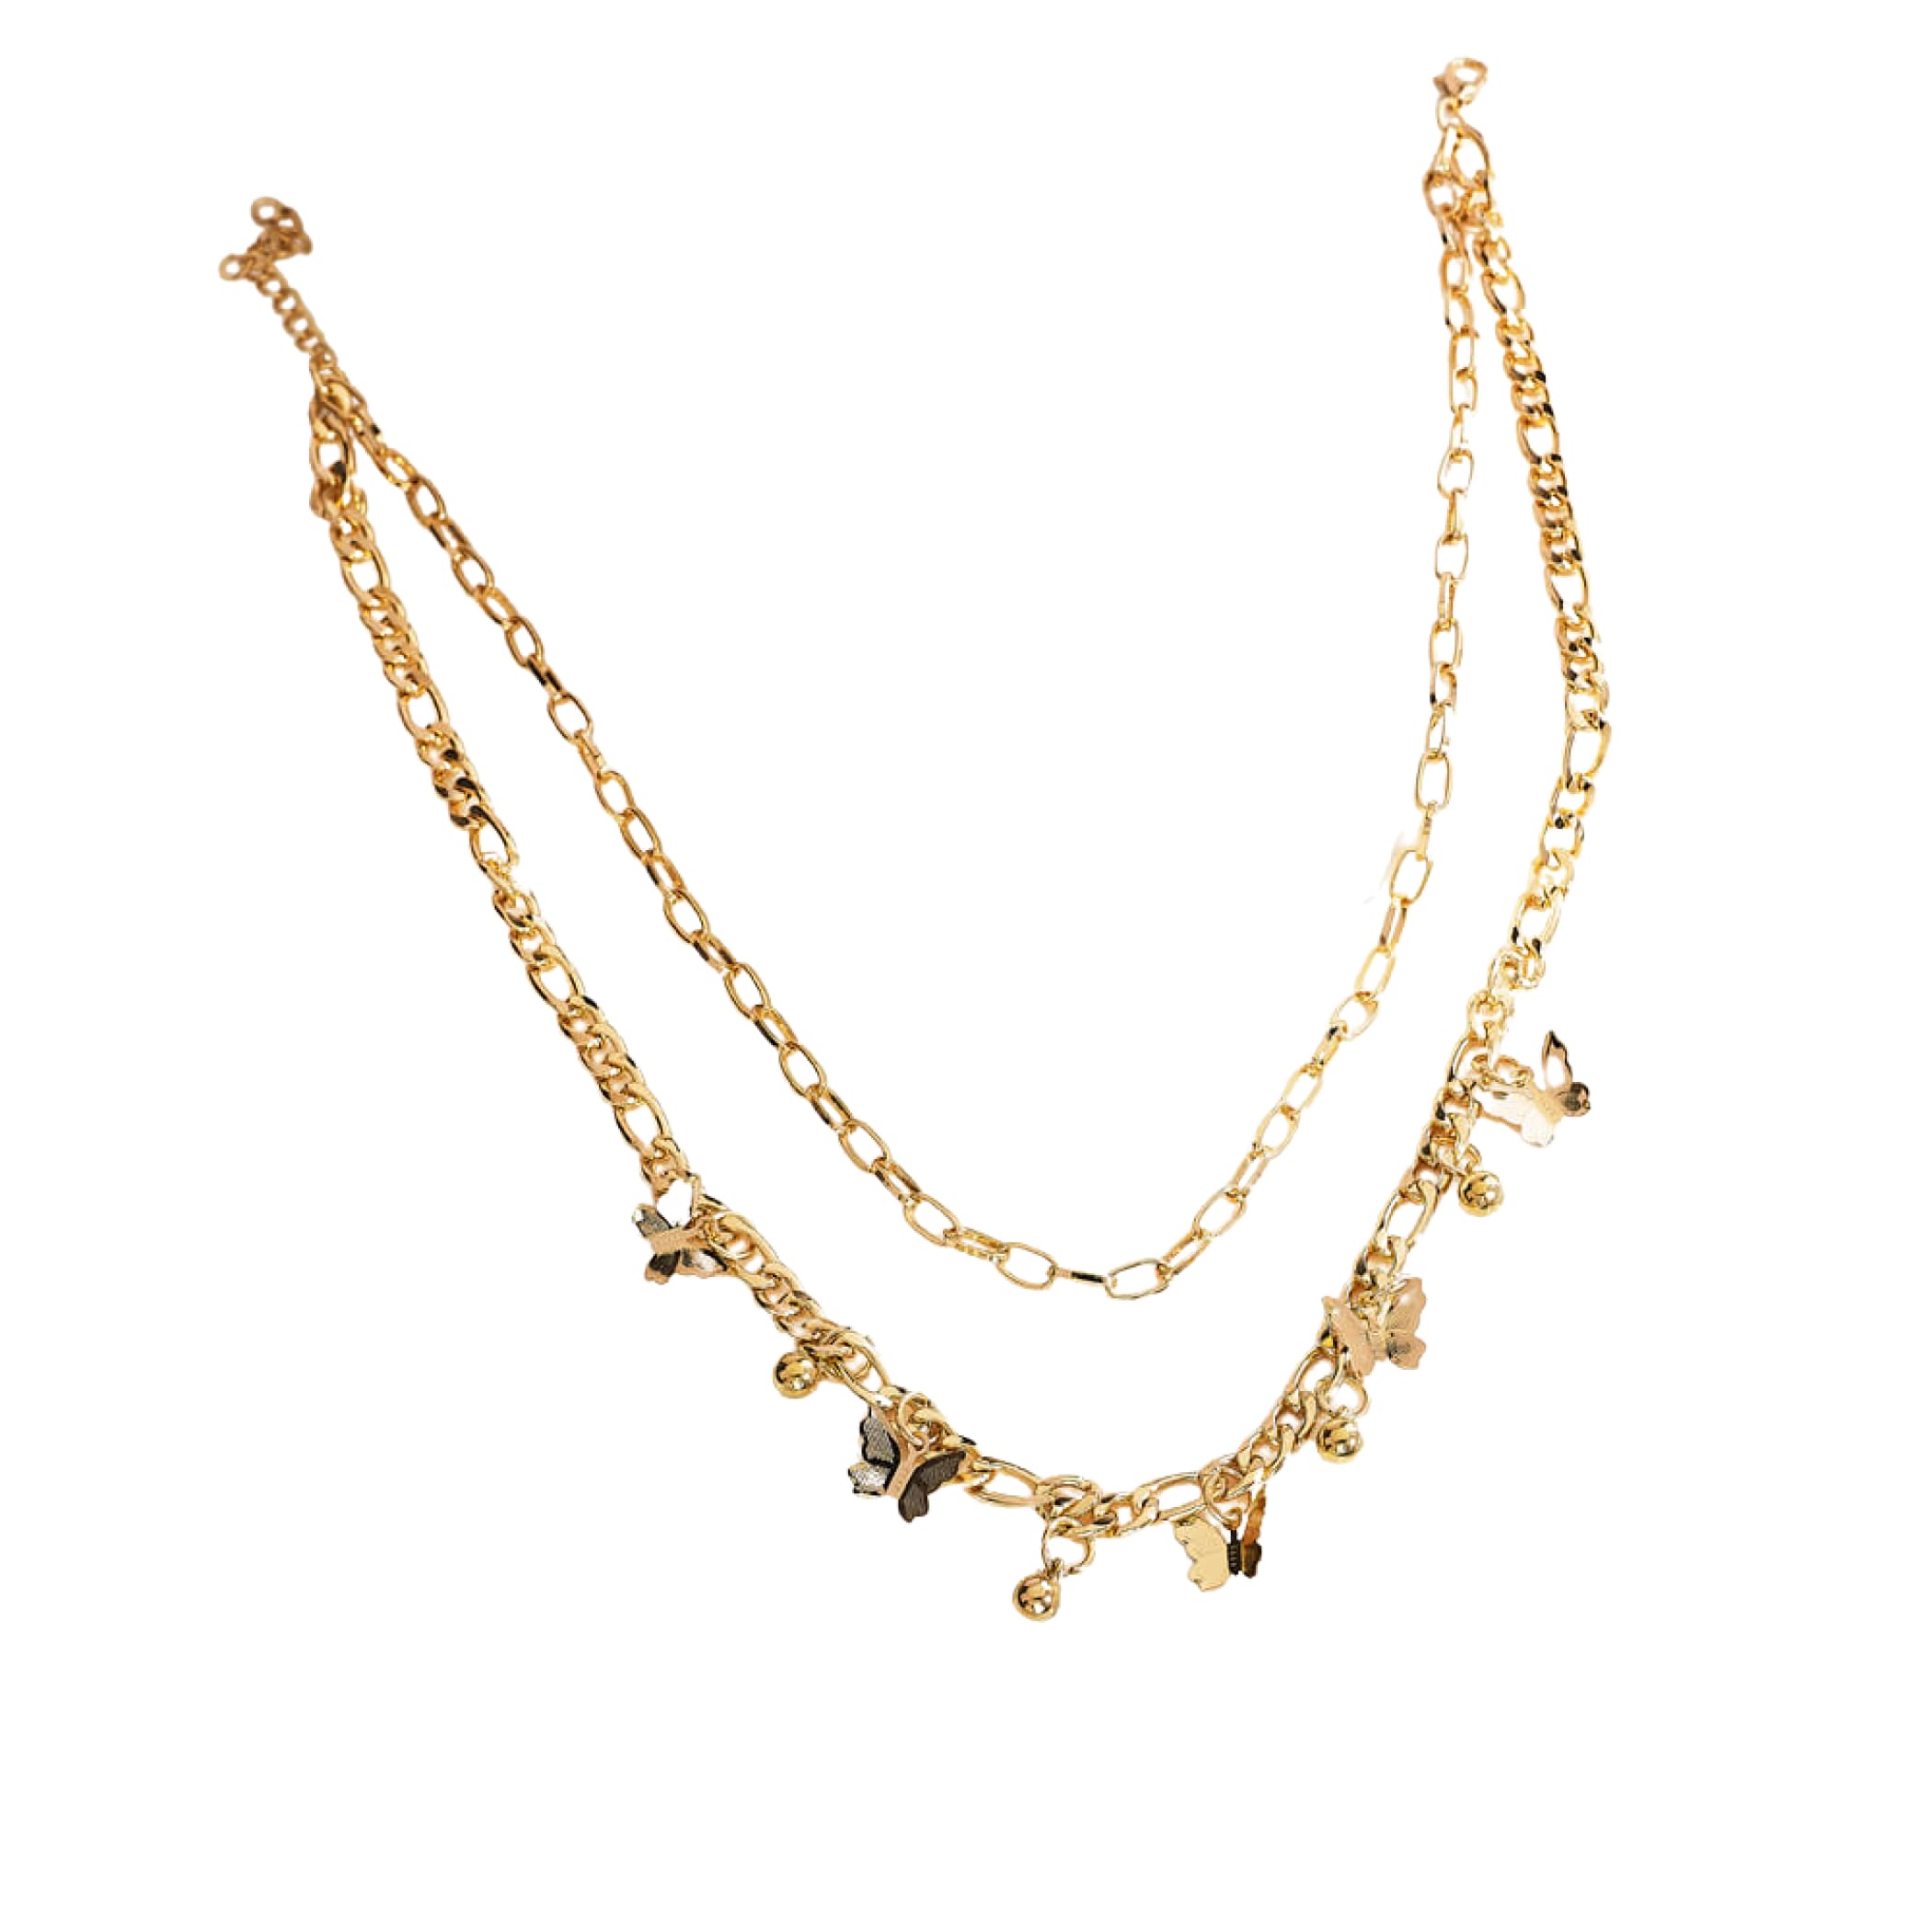 Double layer chain necklace for women aesthetic fake gold